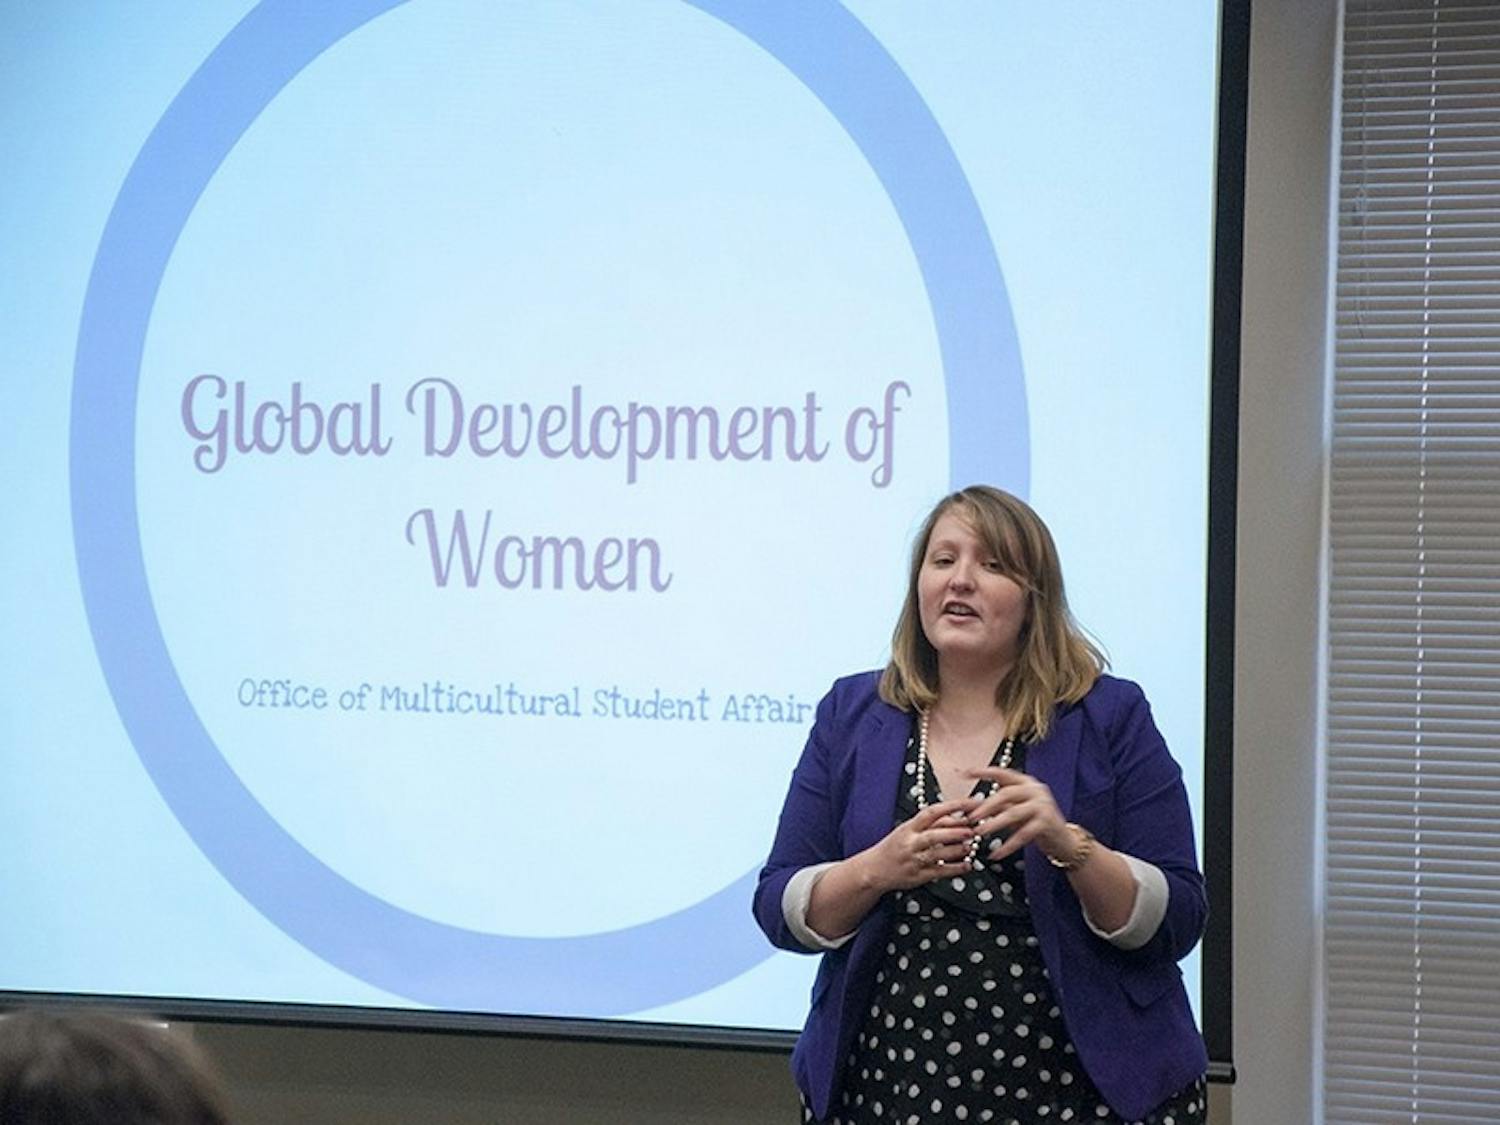 USC higher education and student affairs graduate student Lizzie Dement spoke about worldwide gender inequalities at a Diversity Dialogue lecture Thursday.